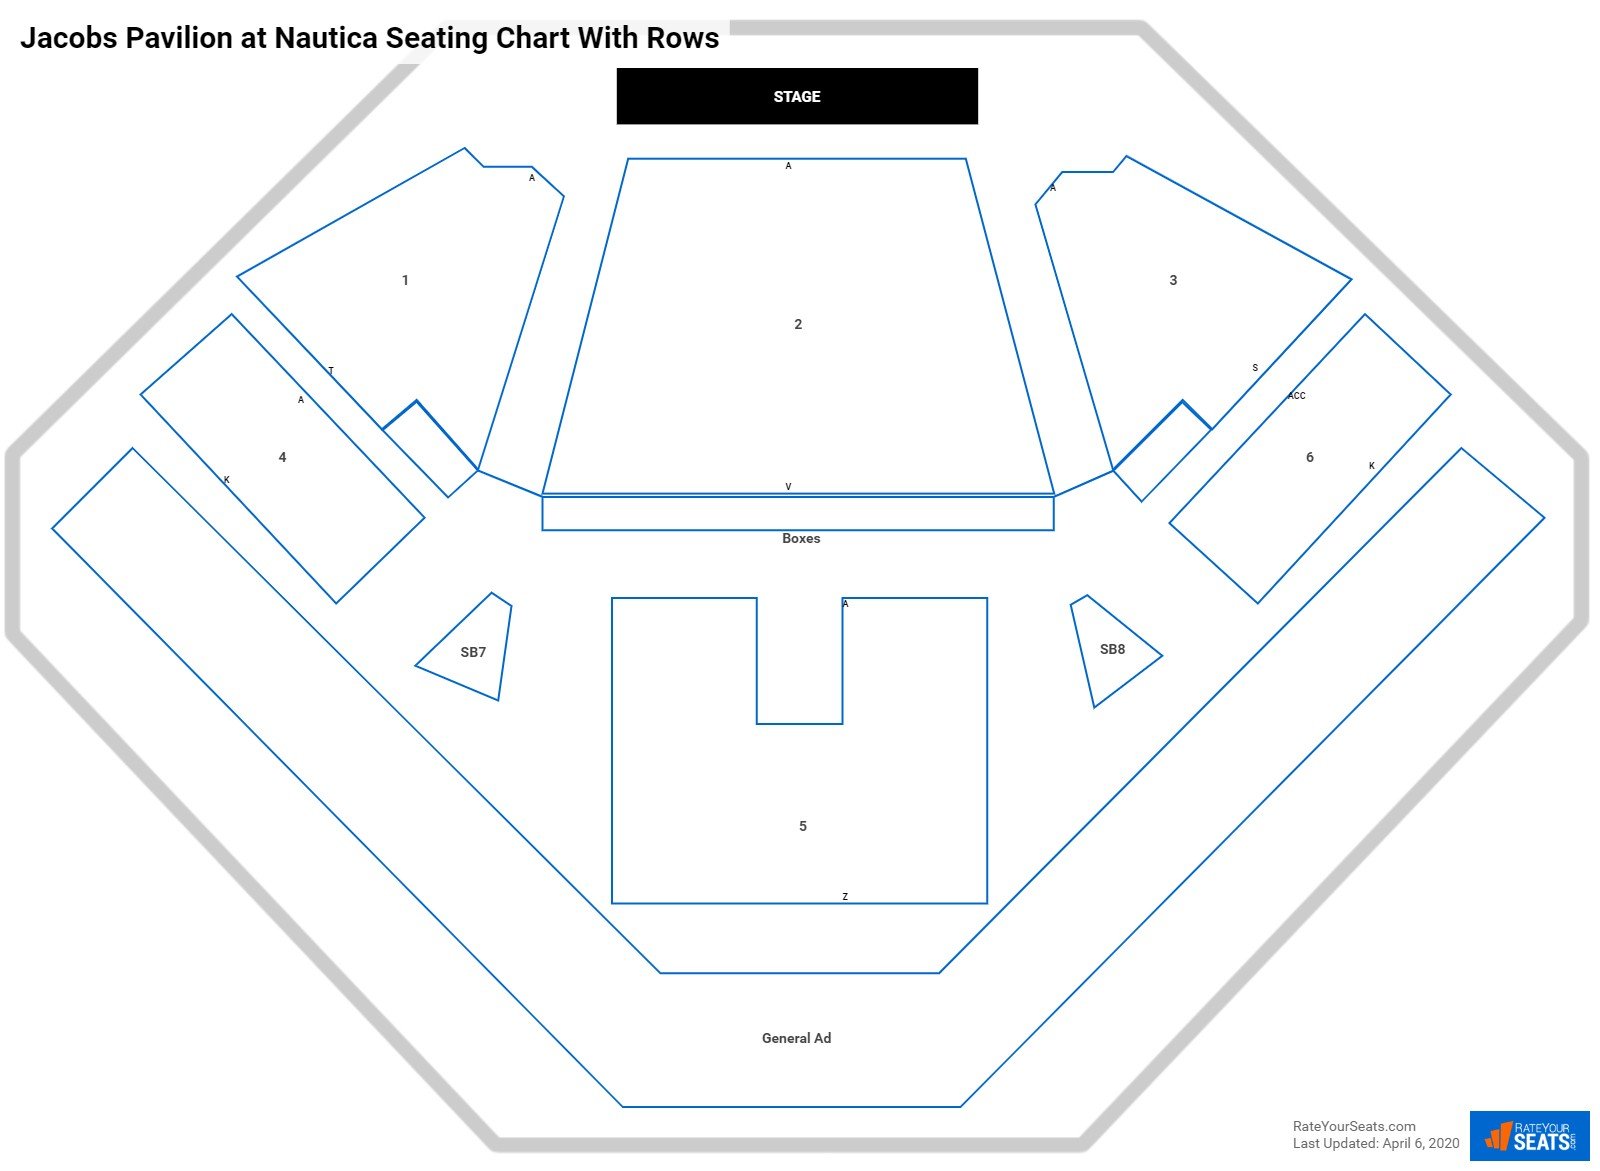 Jacobs Pavilion at Nautica Seating Chart